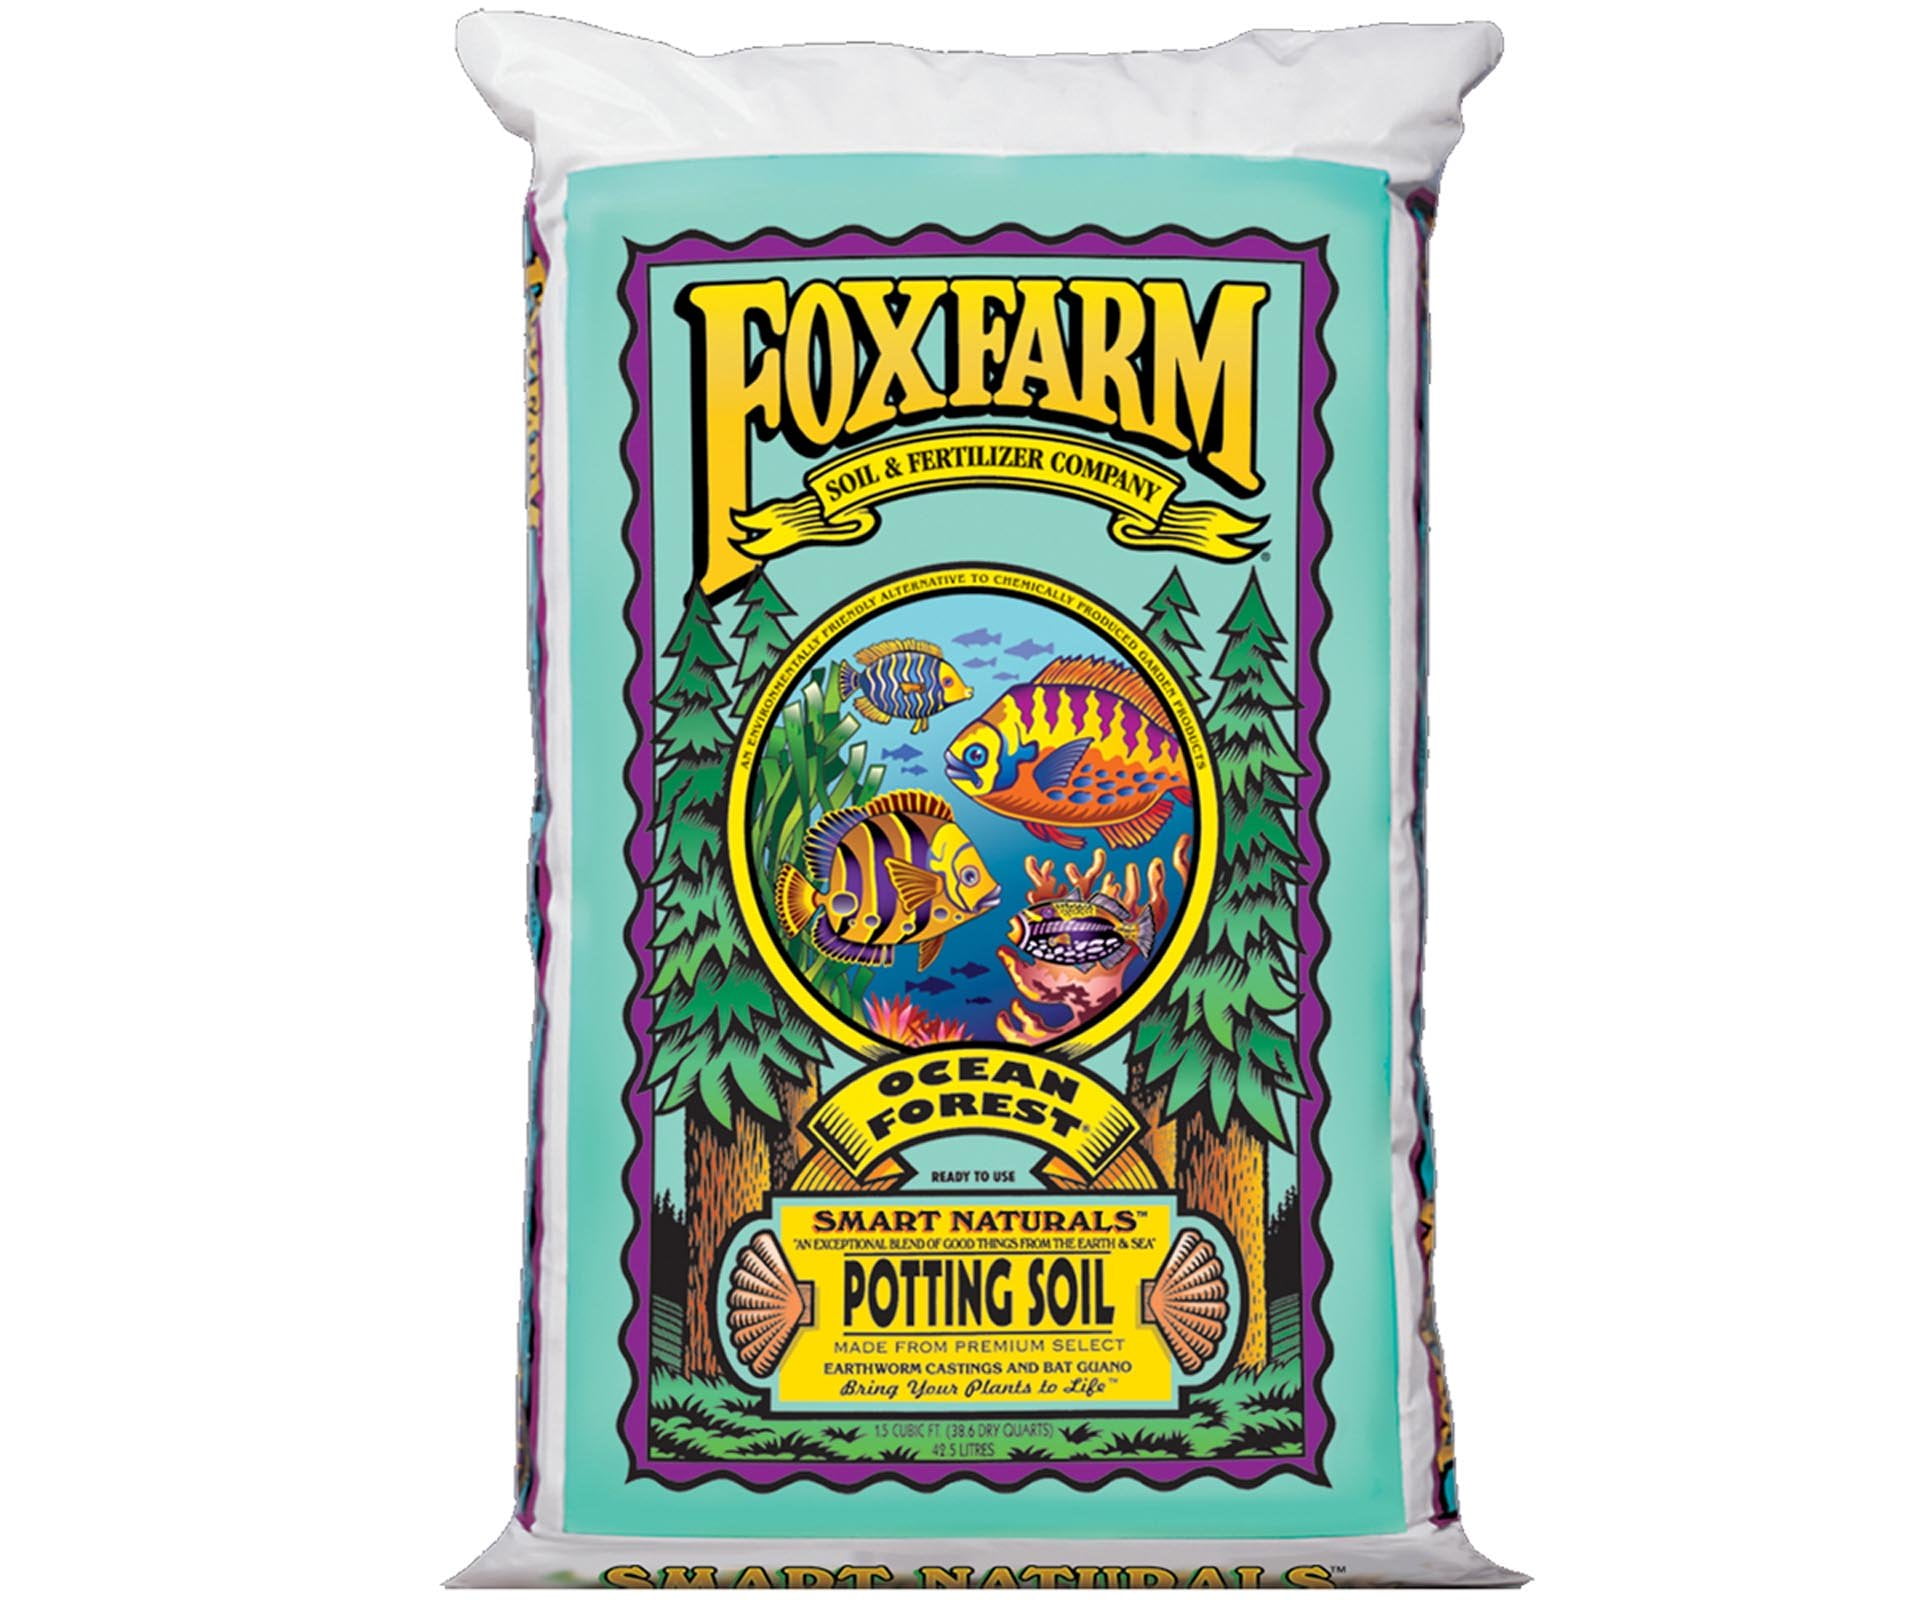 A clear image of the FoxFarm Ocean Forest Potting Soil packaging.